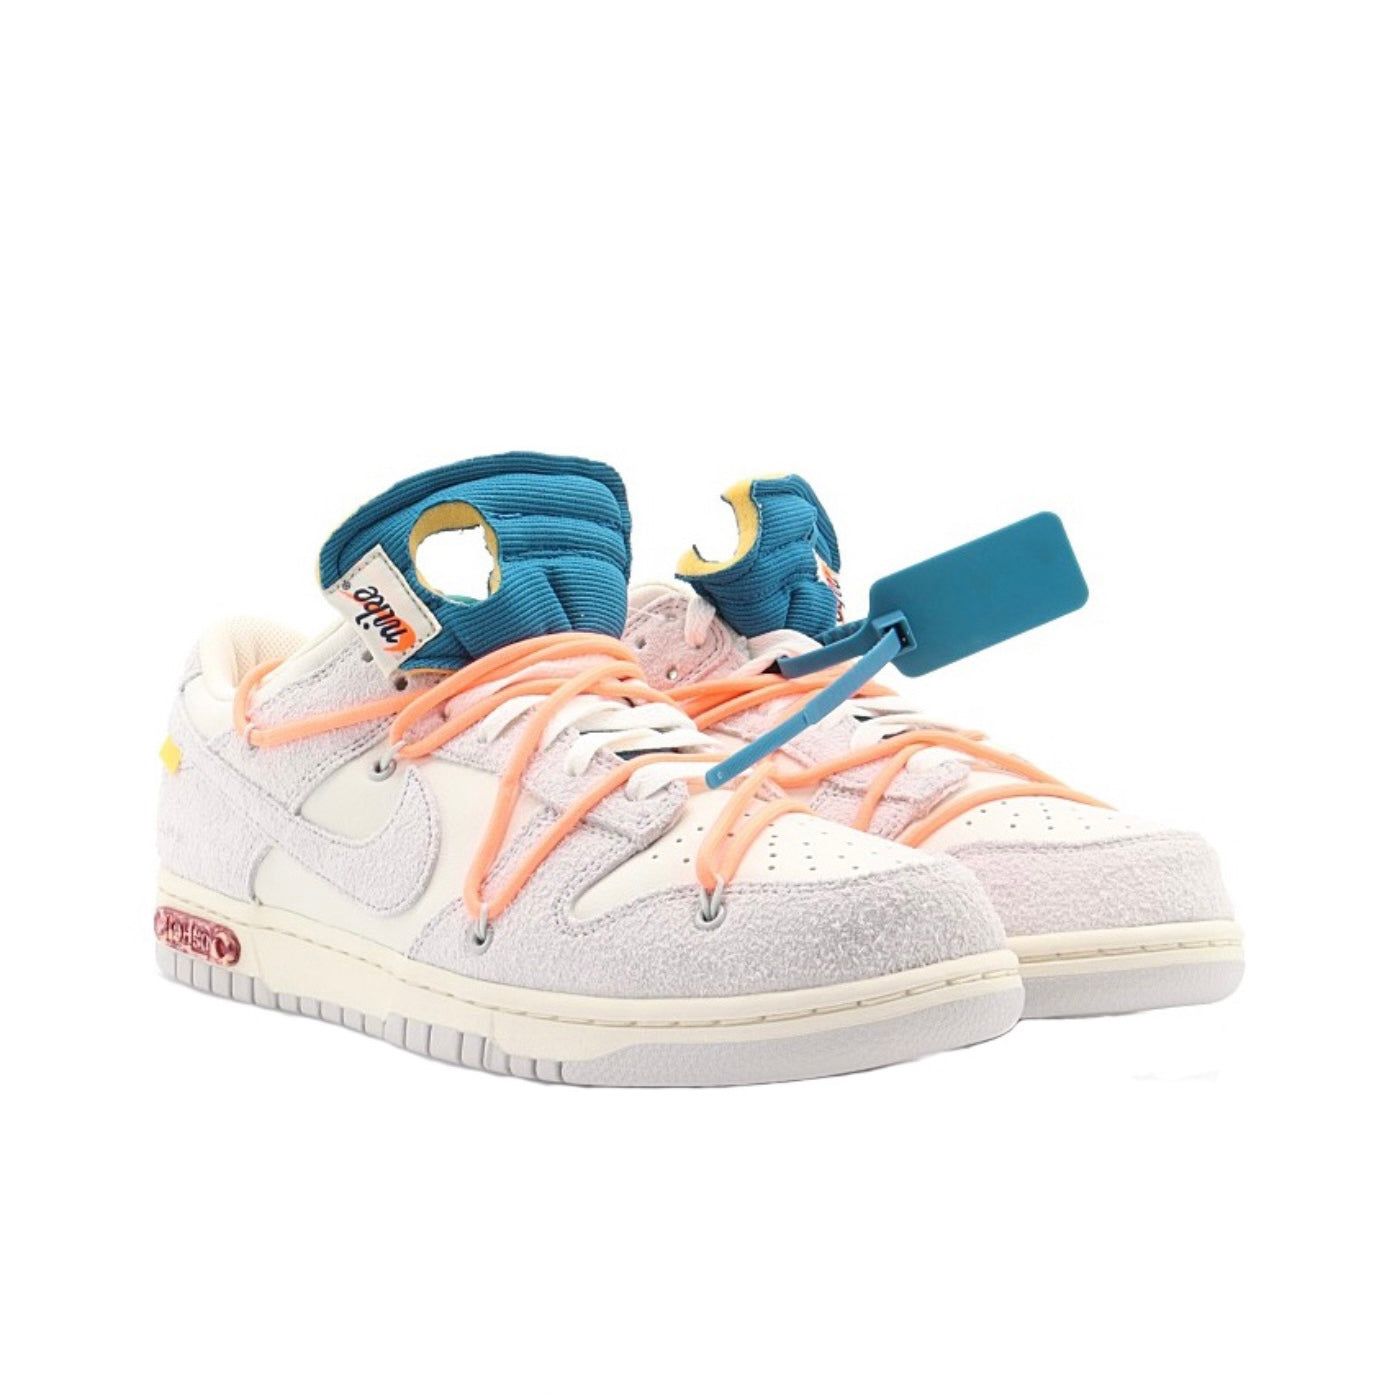 Off-White nike dunk low lot19靴